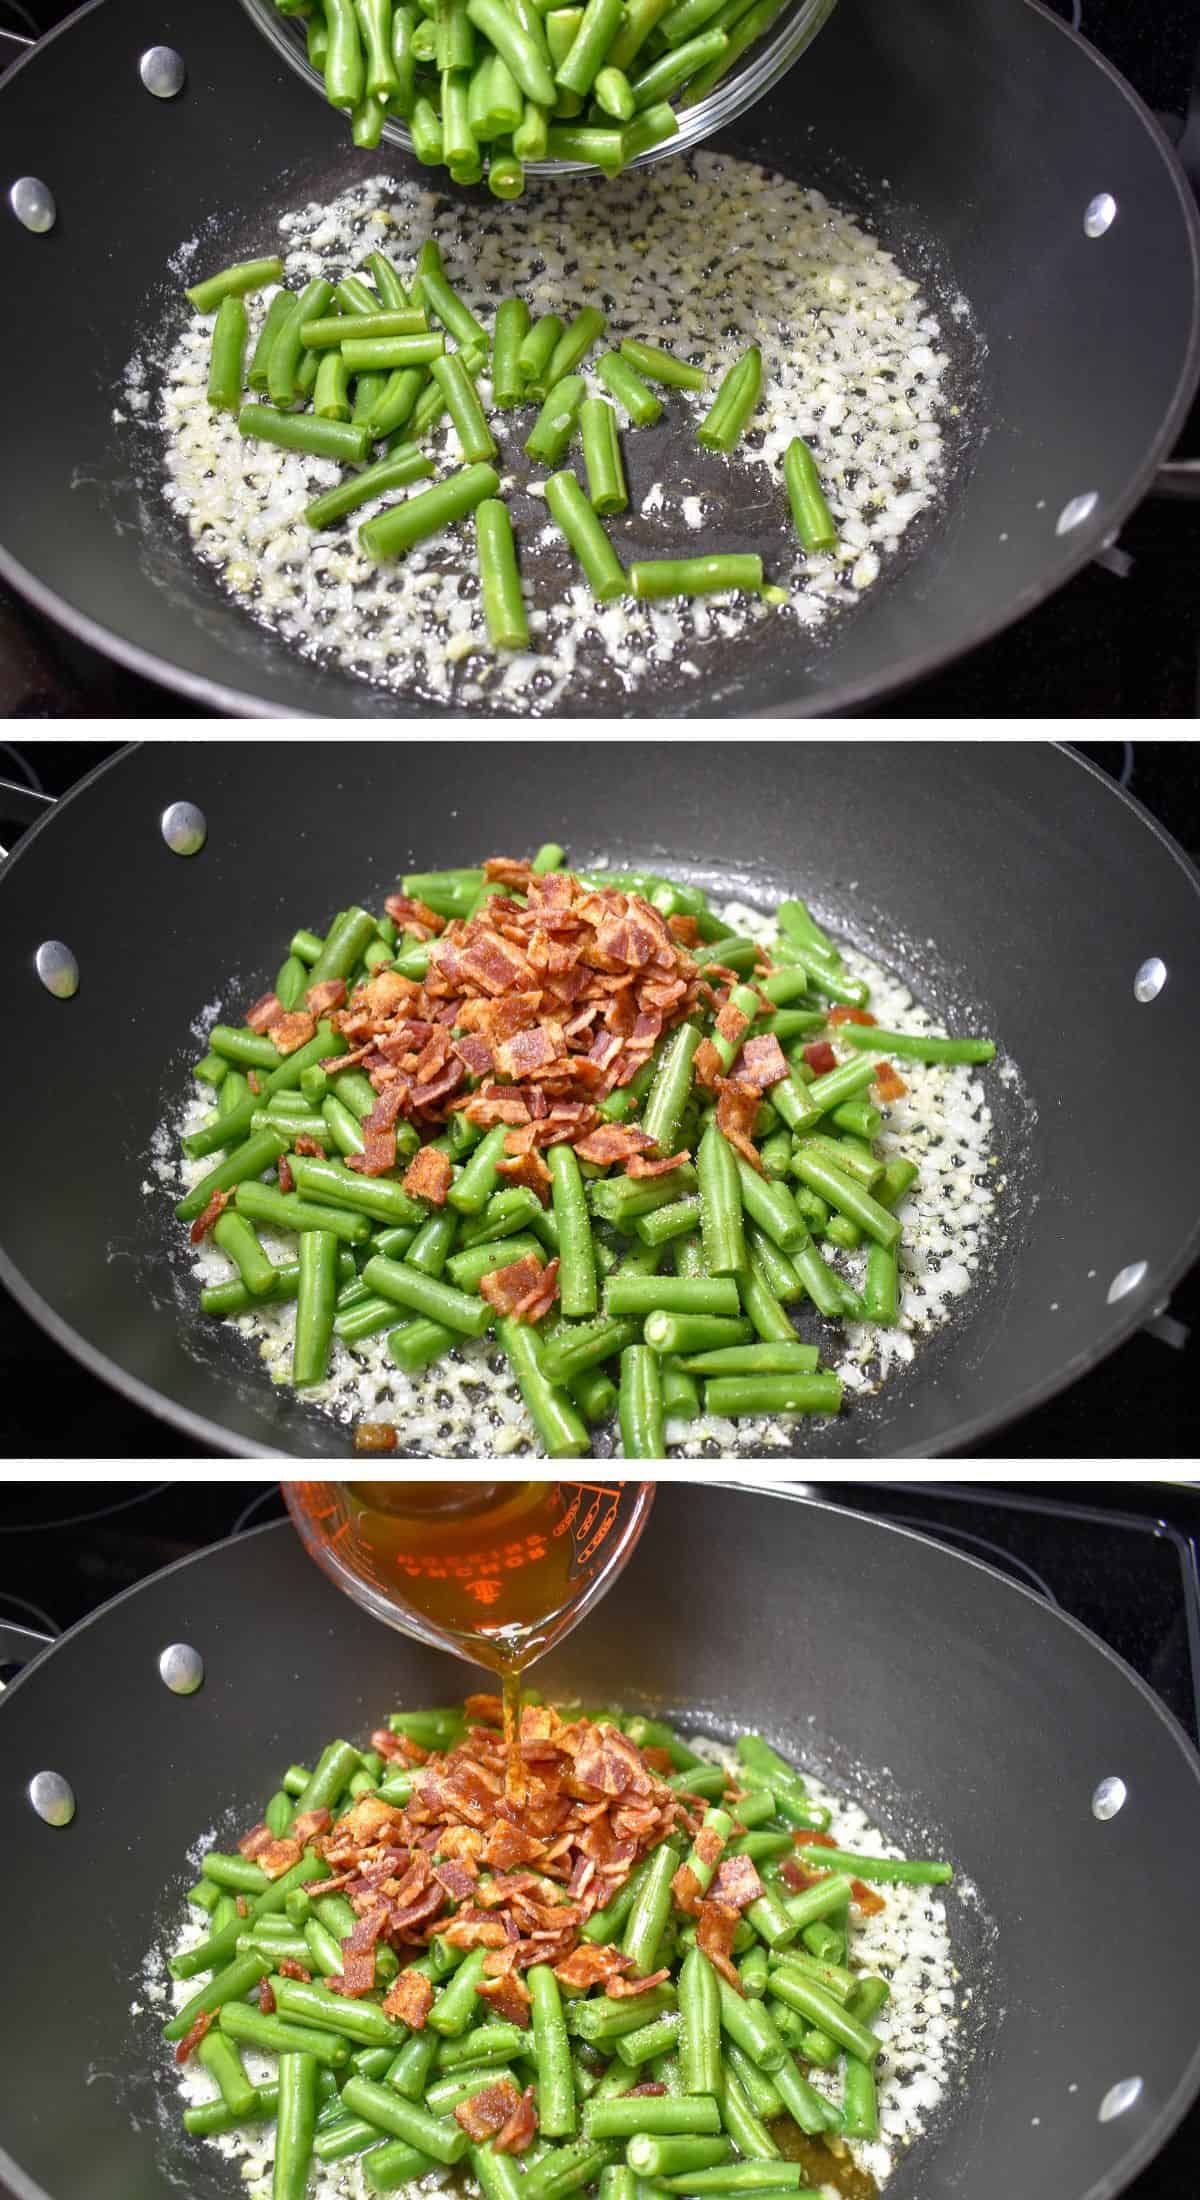 A collage of three images showing the steps to cooking the green beans.